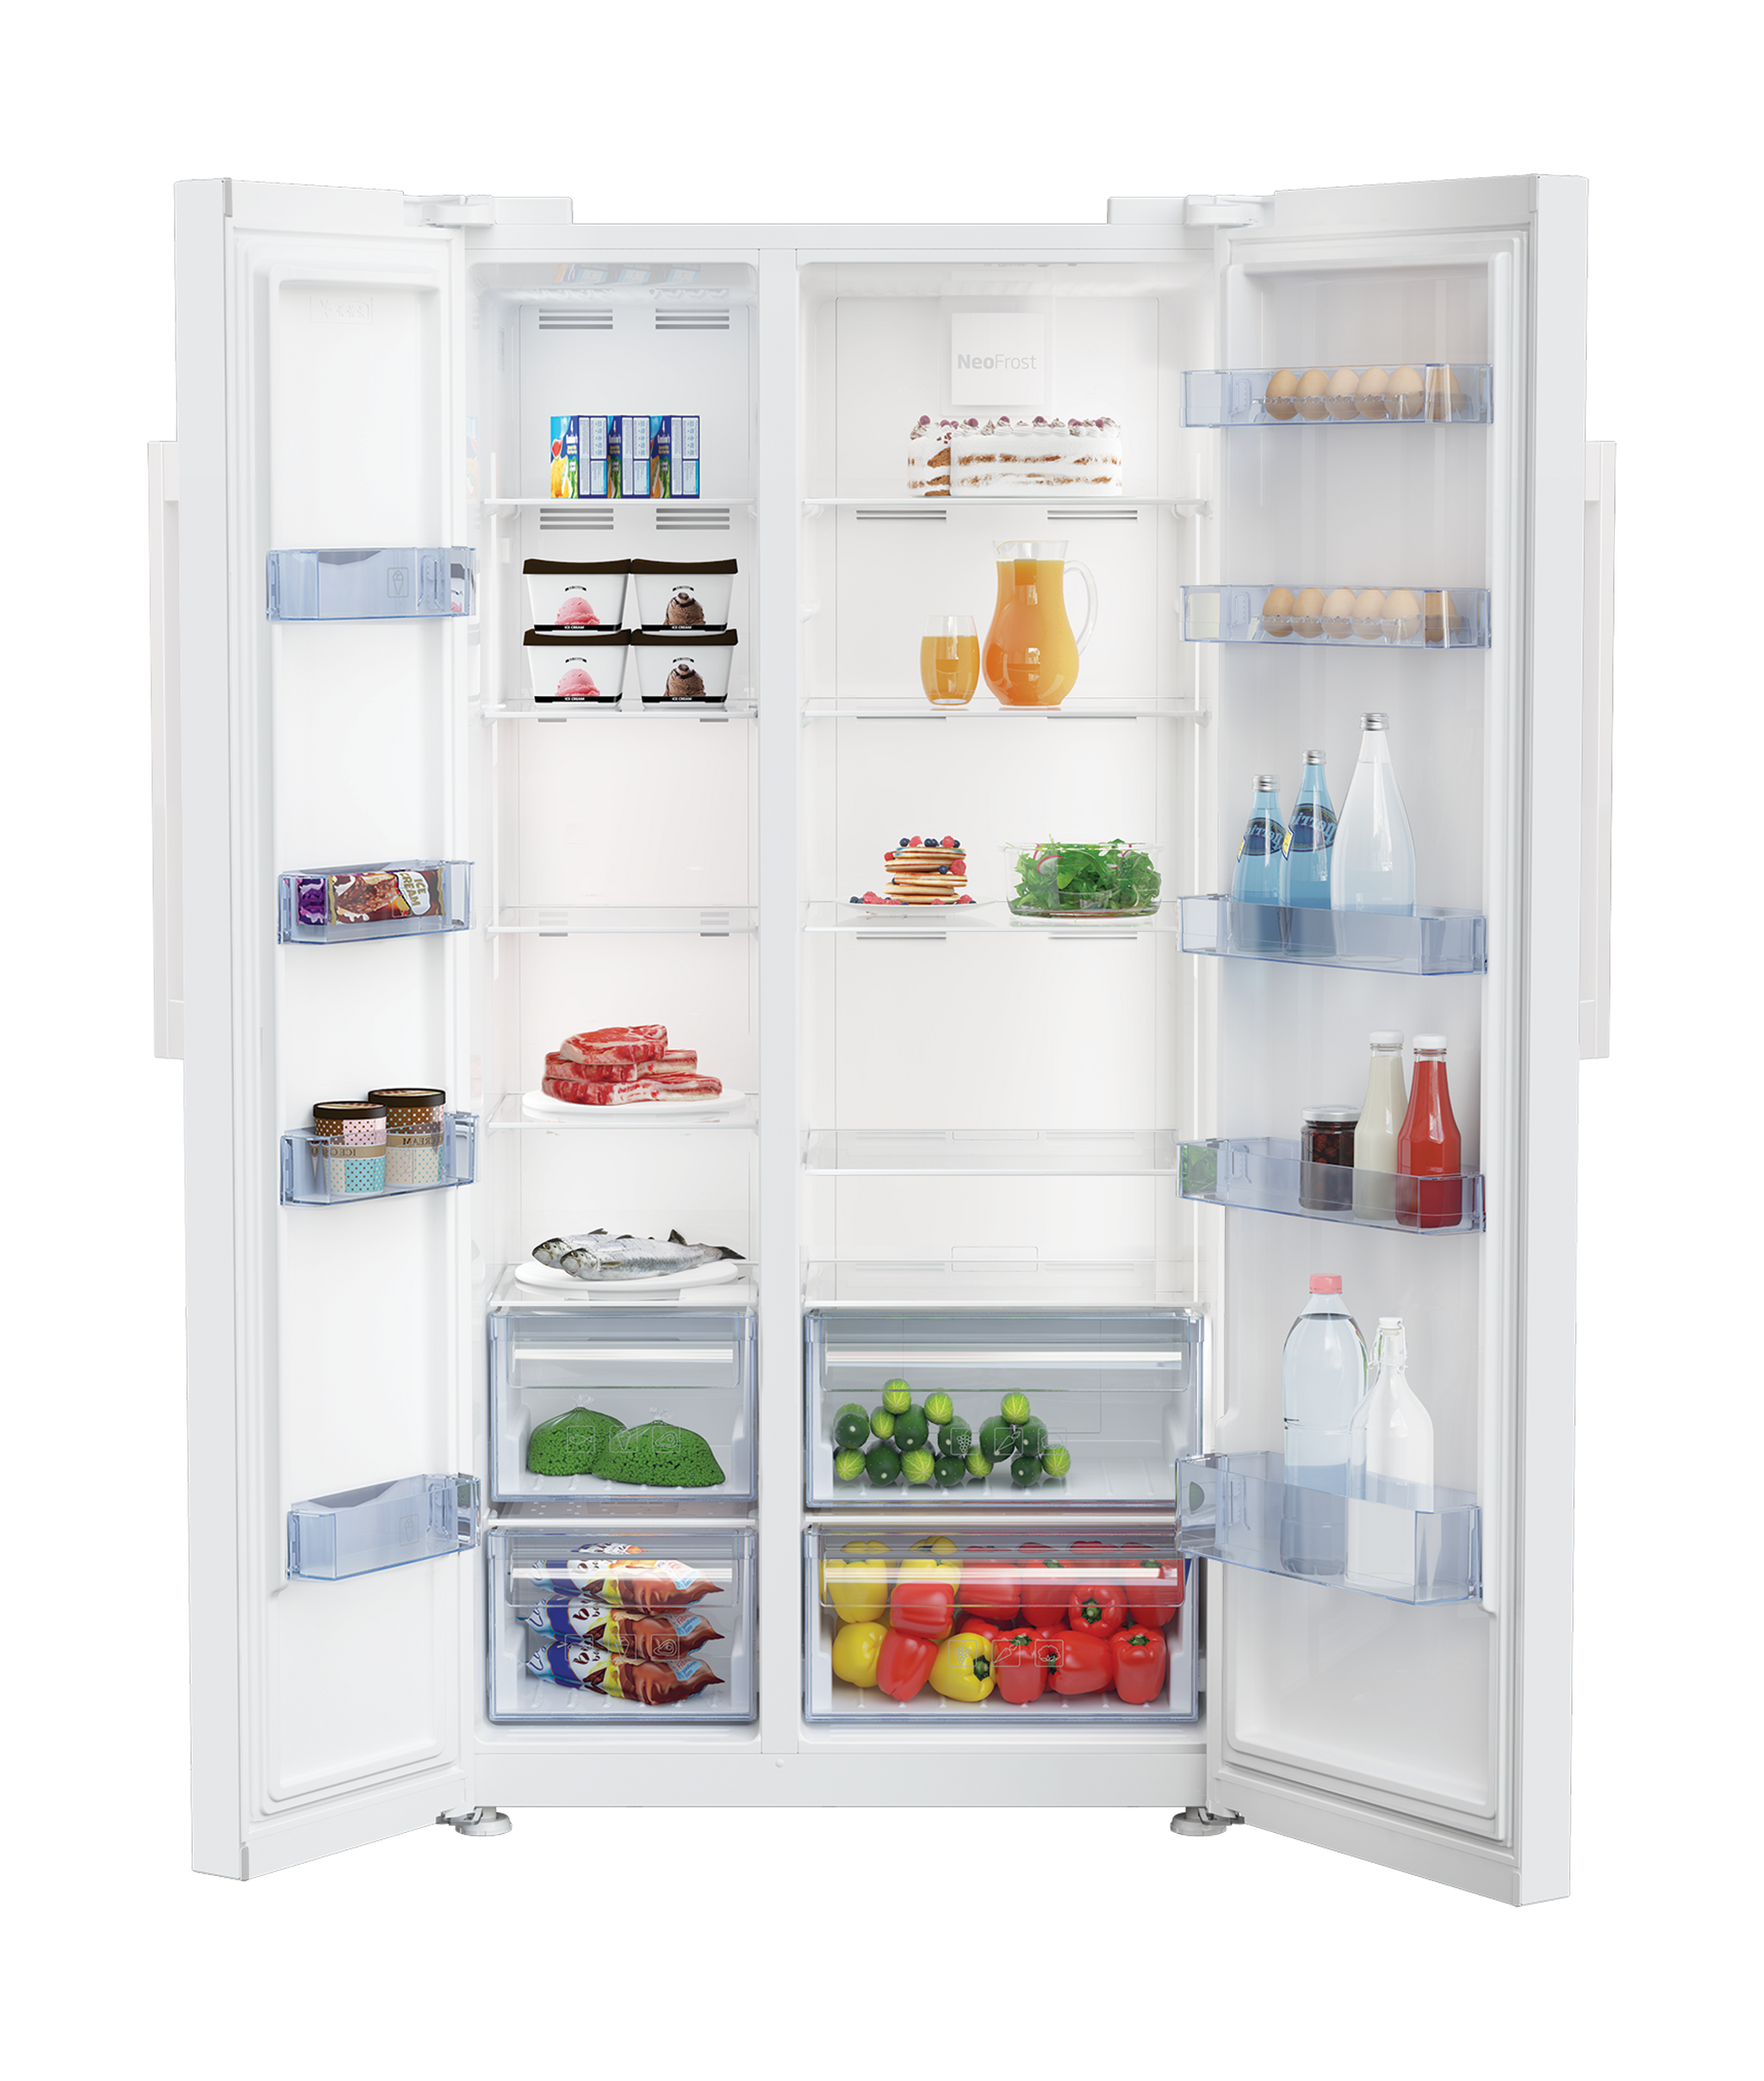 Beko 24.5Cft.640L Side By Side Refrigerator (GN170110W) – White